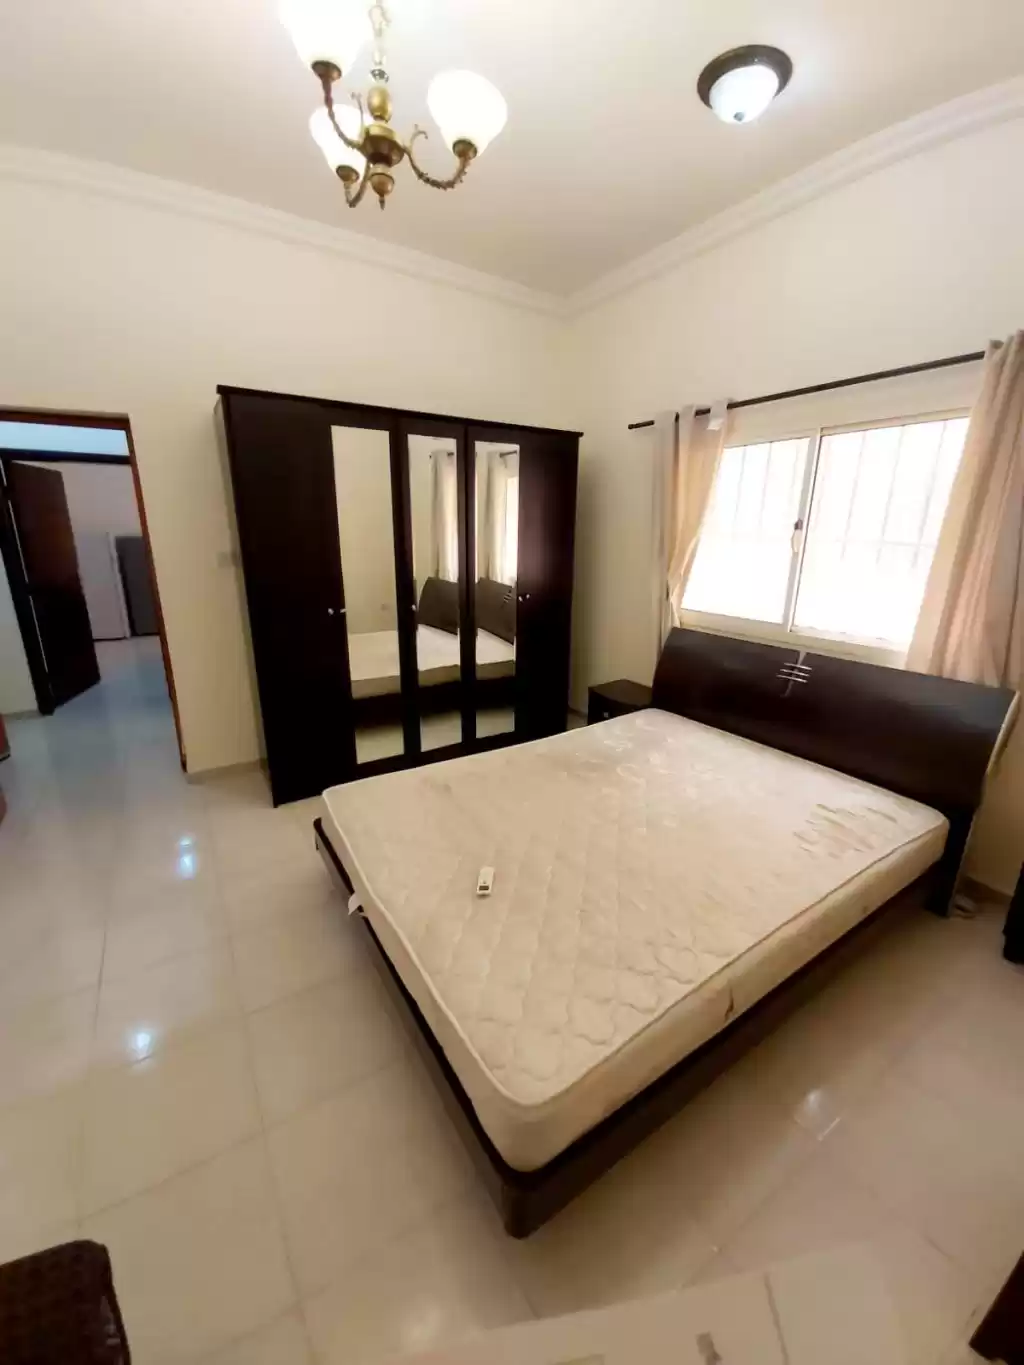 Residential Ready Property 1 Bedroom F/F Apartment  for rent in Al Sadd , Doha #12717 - 1  image 